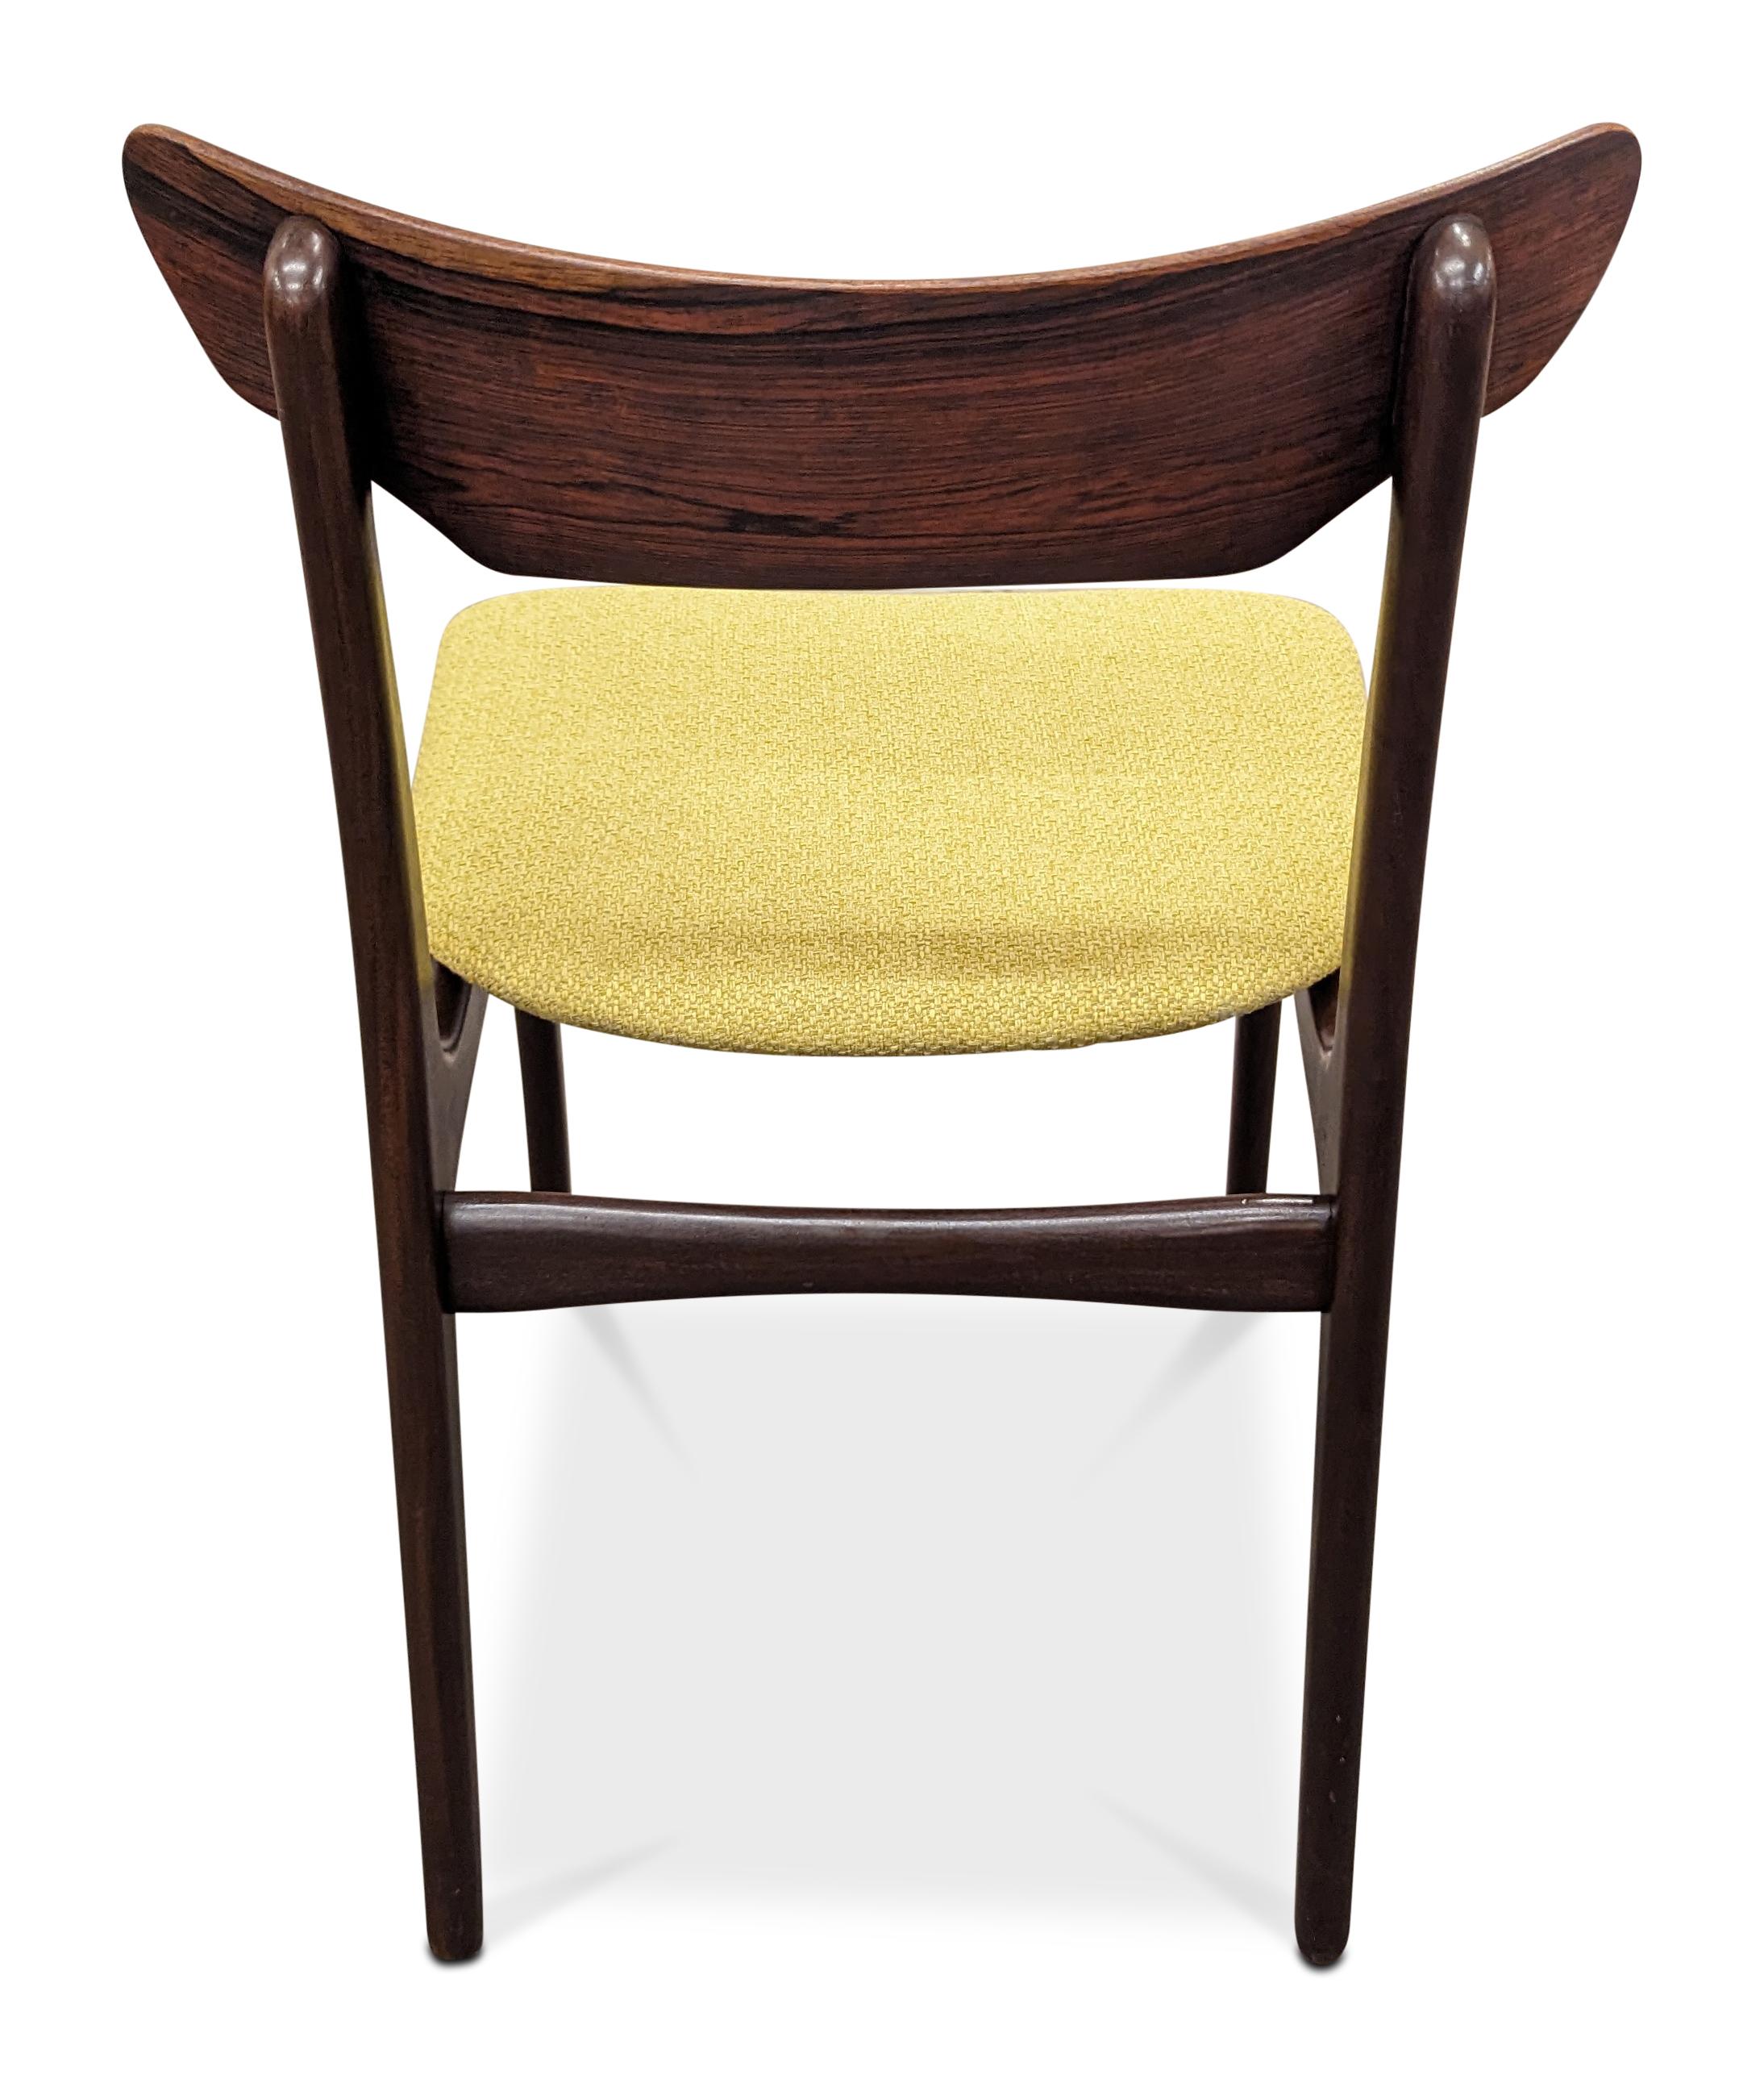 6 Schoning Elegaard Rosewood Dining Chairs - 0224121 Vintage Danish Mid Century In Good Condition In Jersey City, NJ